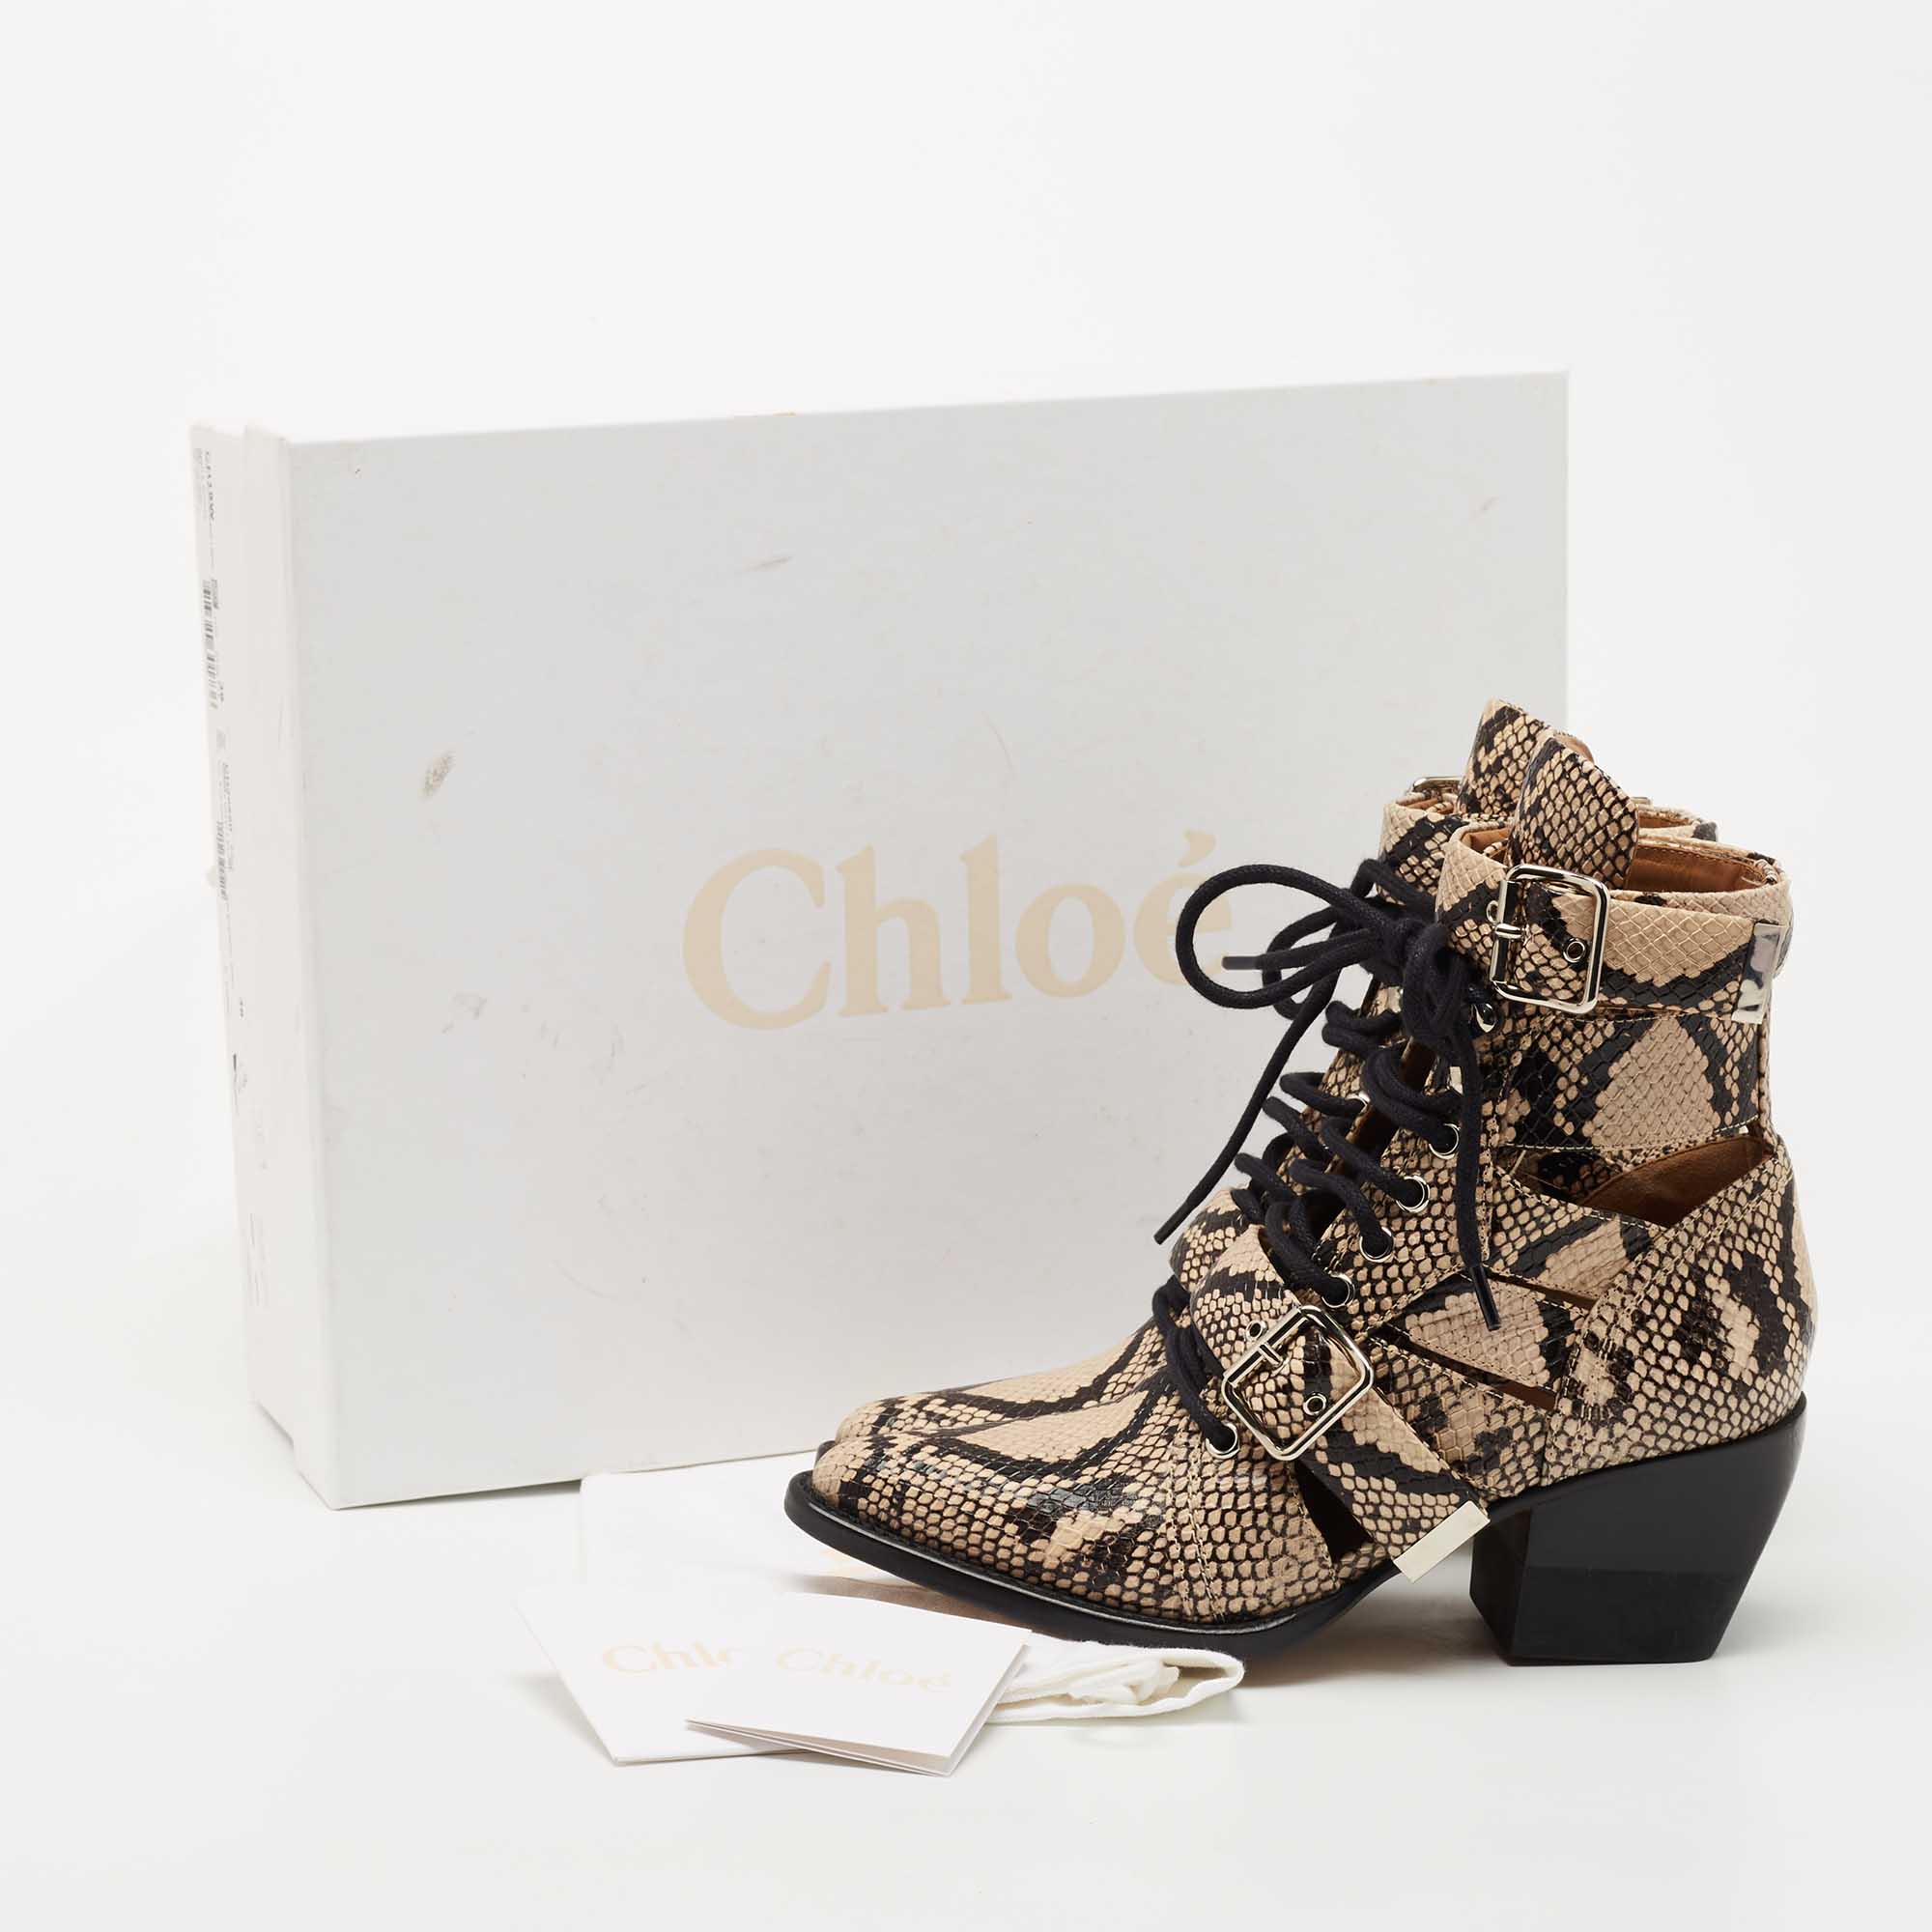 Chloe Brown/Black Python Embossed Leather Rylee Ankle Boots Size 36